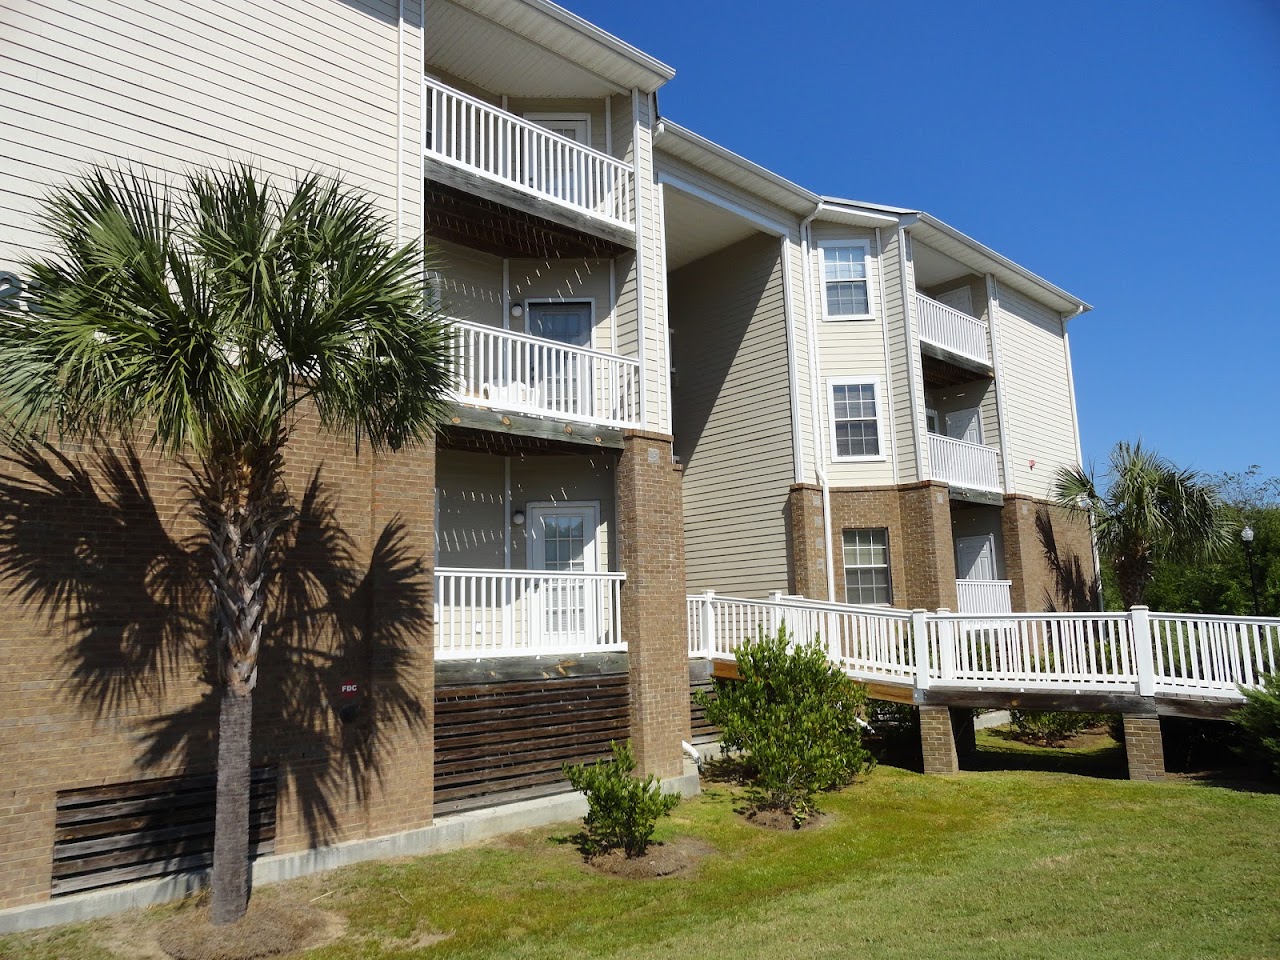 Photo of OSPREY PLACE APTS. Affordable housing located at 2390 BAKER HOSPITAL BLVD NORTH CHARLESTON, SC 29405